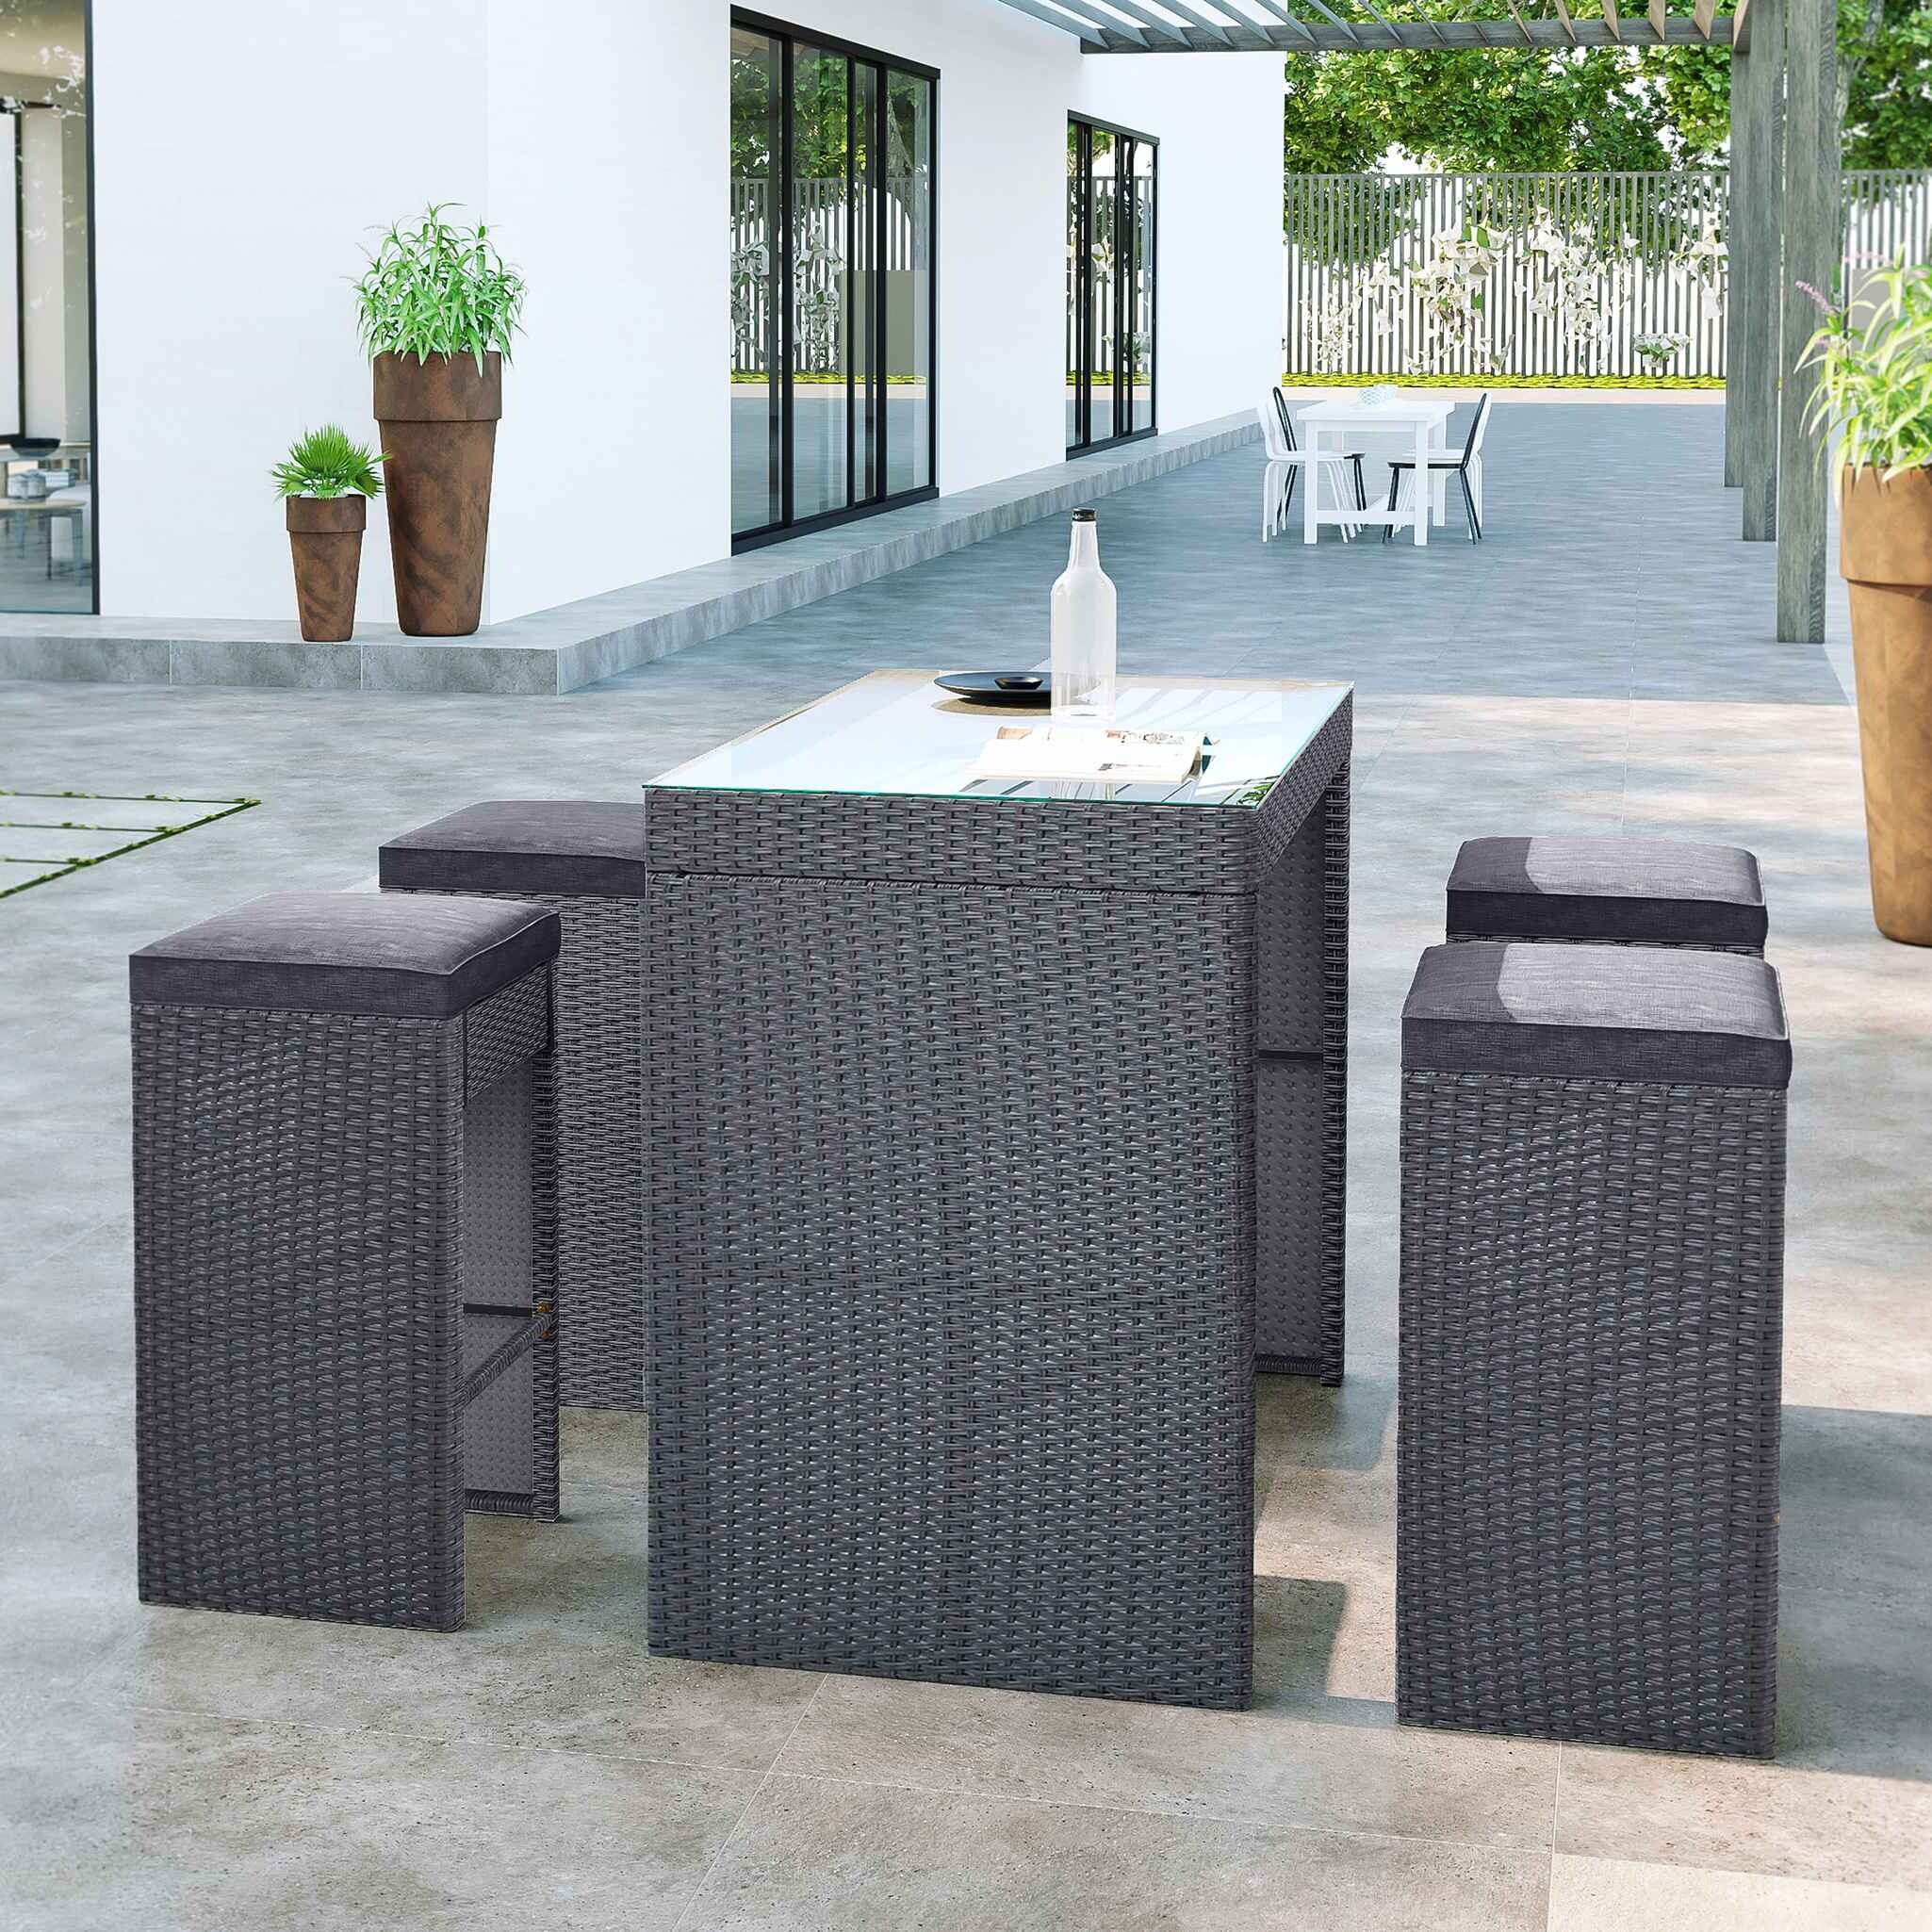 5-piece Rattan Outdoor Patio Furniture Set Bar Dining Table Set With 4 Stools